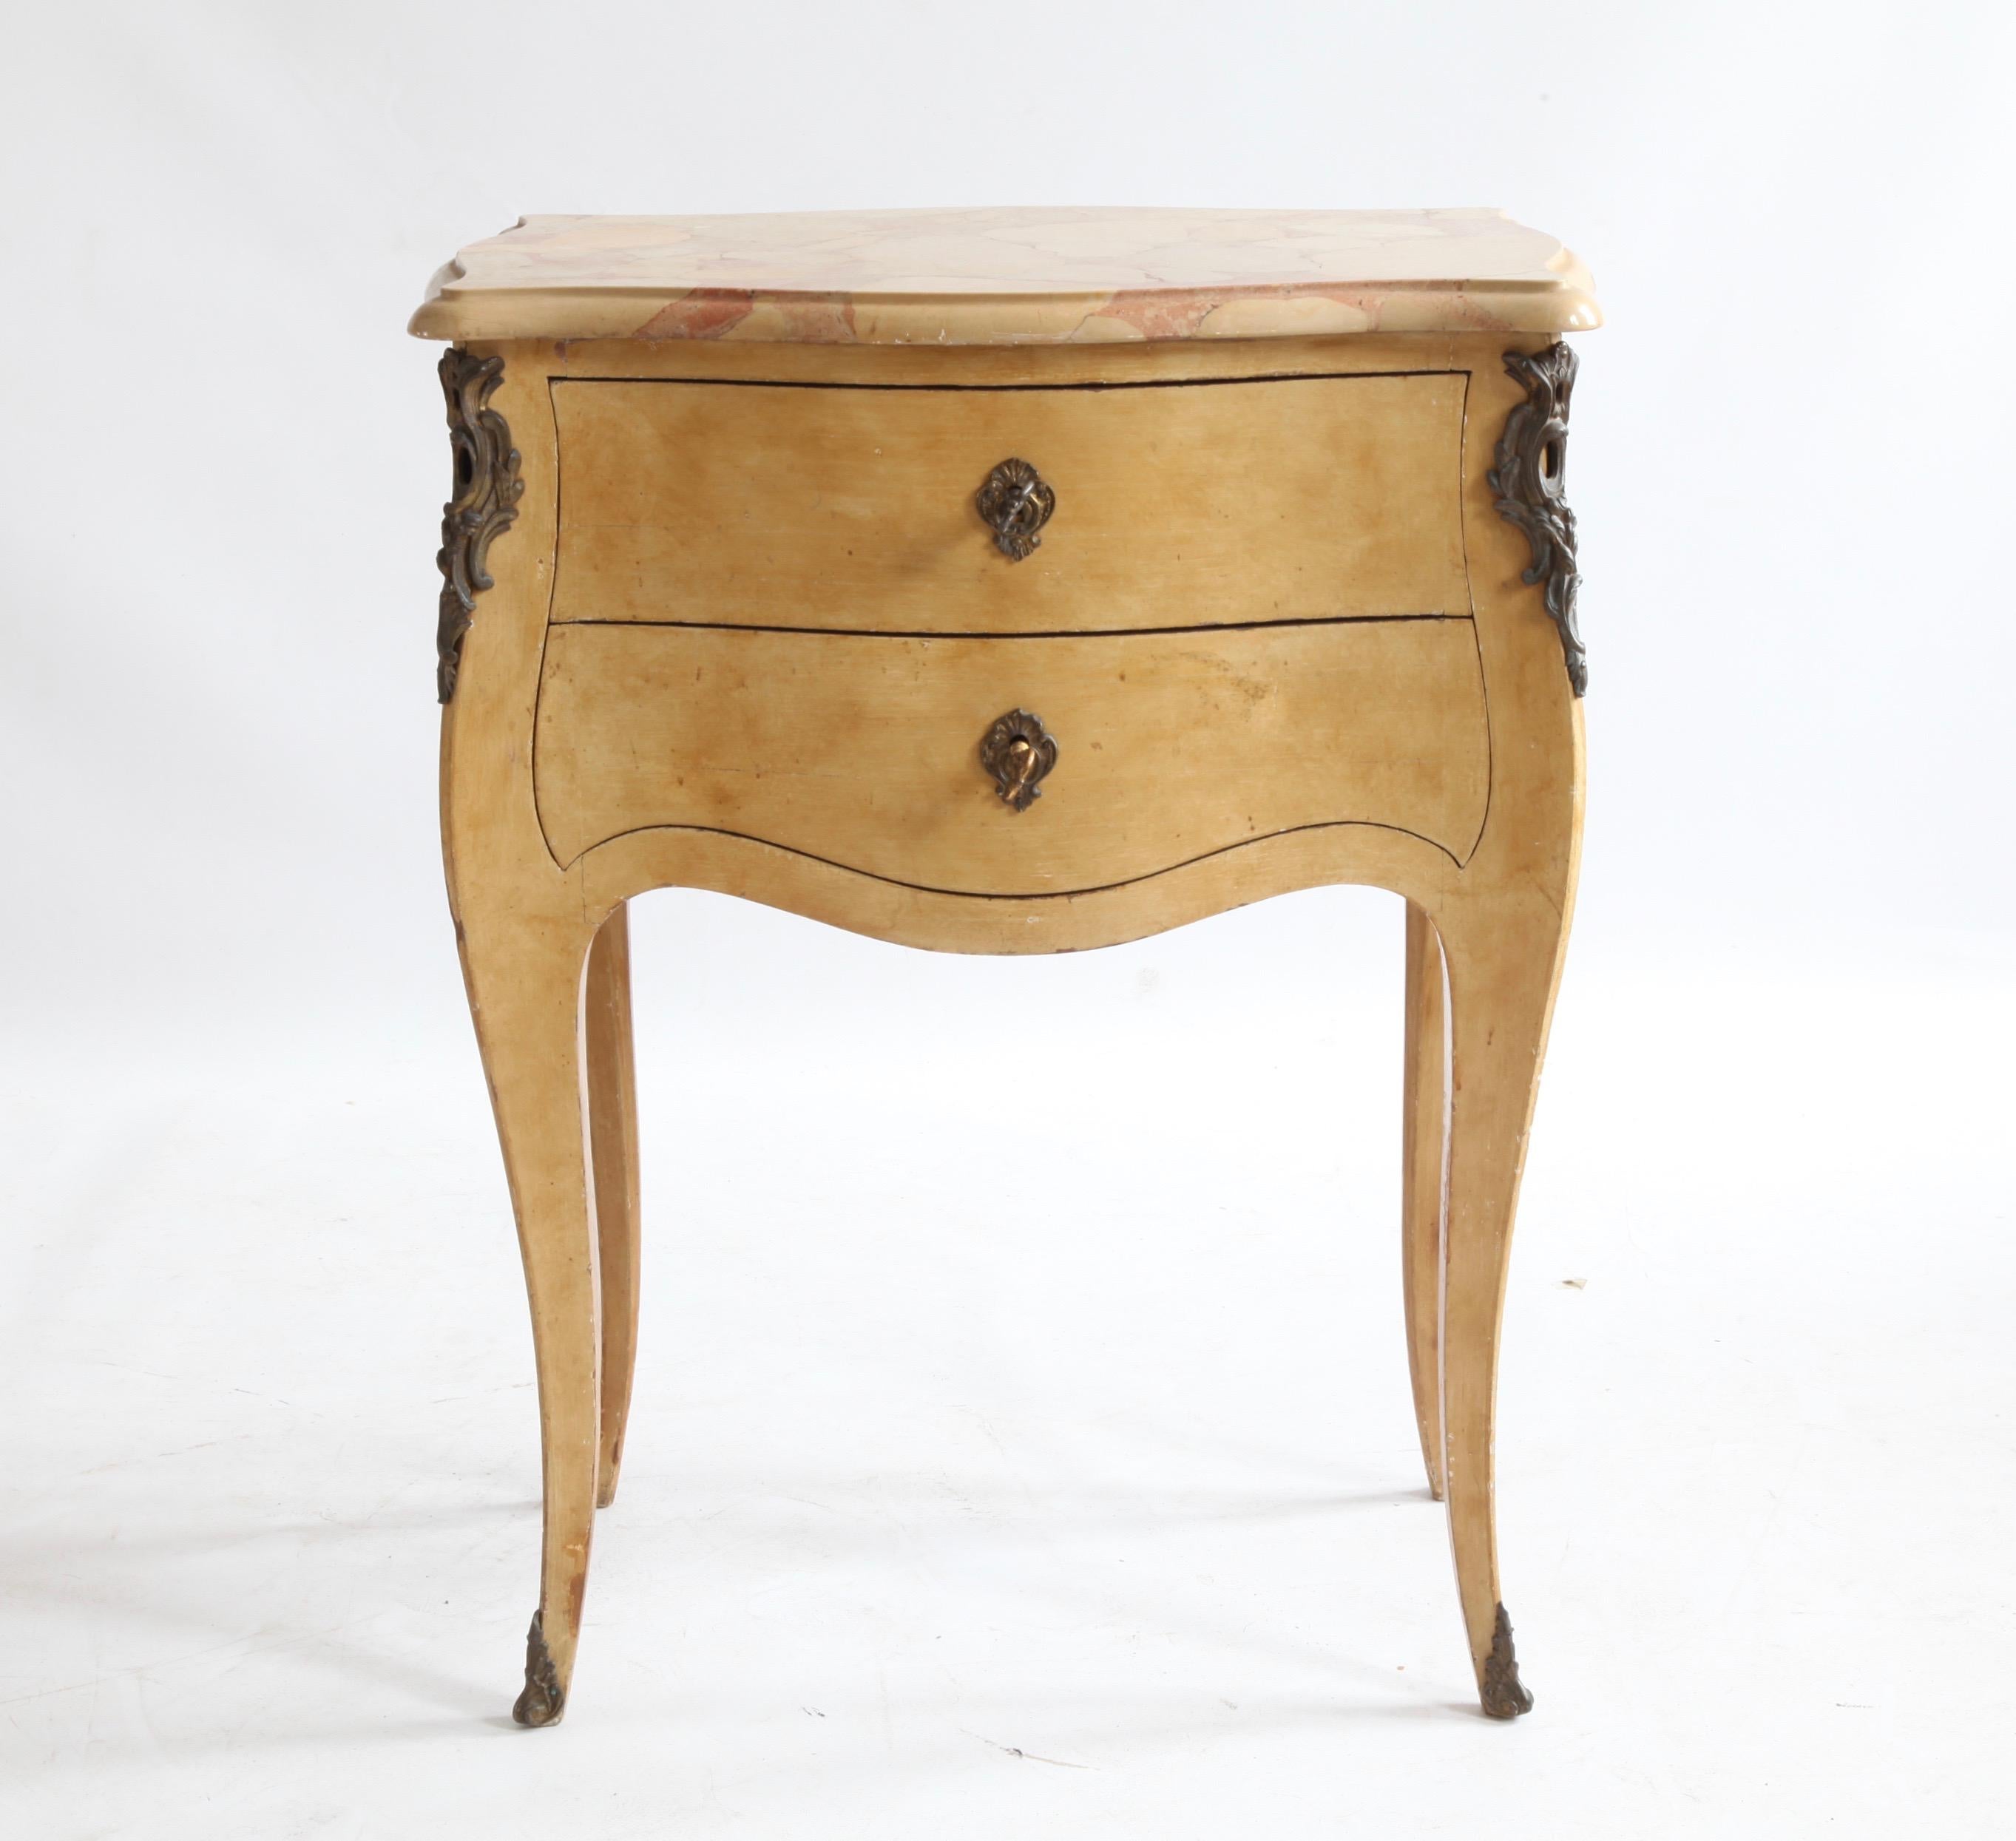 Wood Antique French Louis XV Style Bedside Table or Small Commode in Yellow Ochre